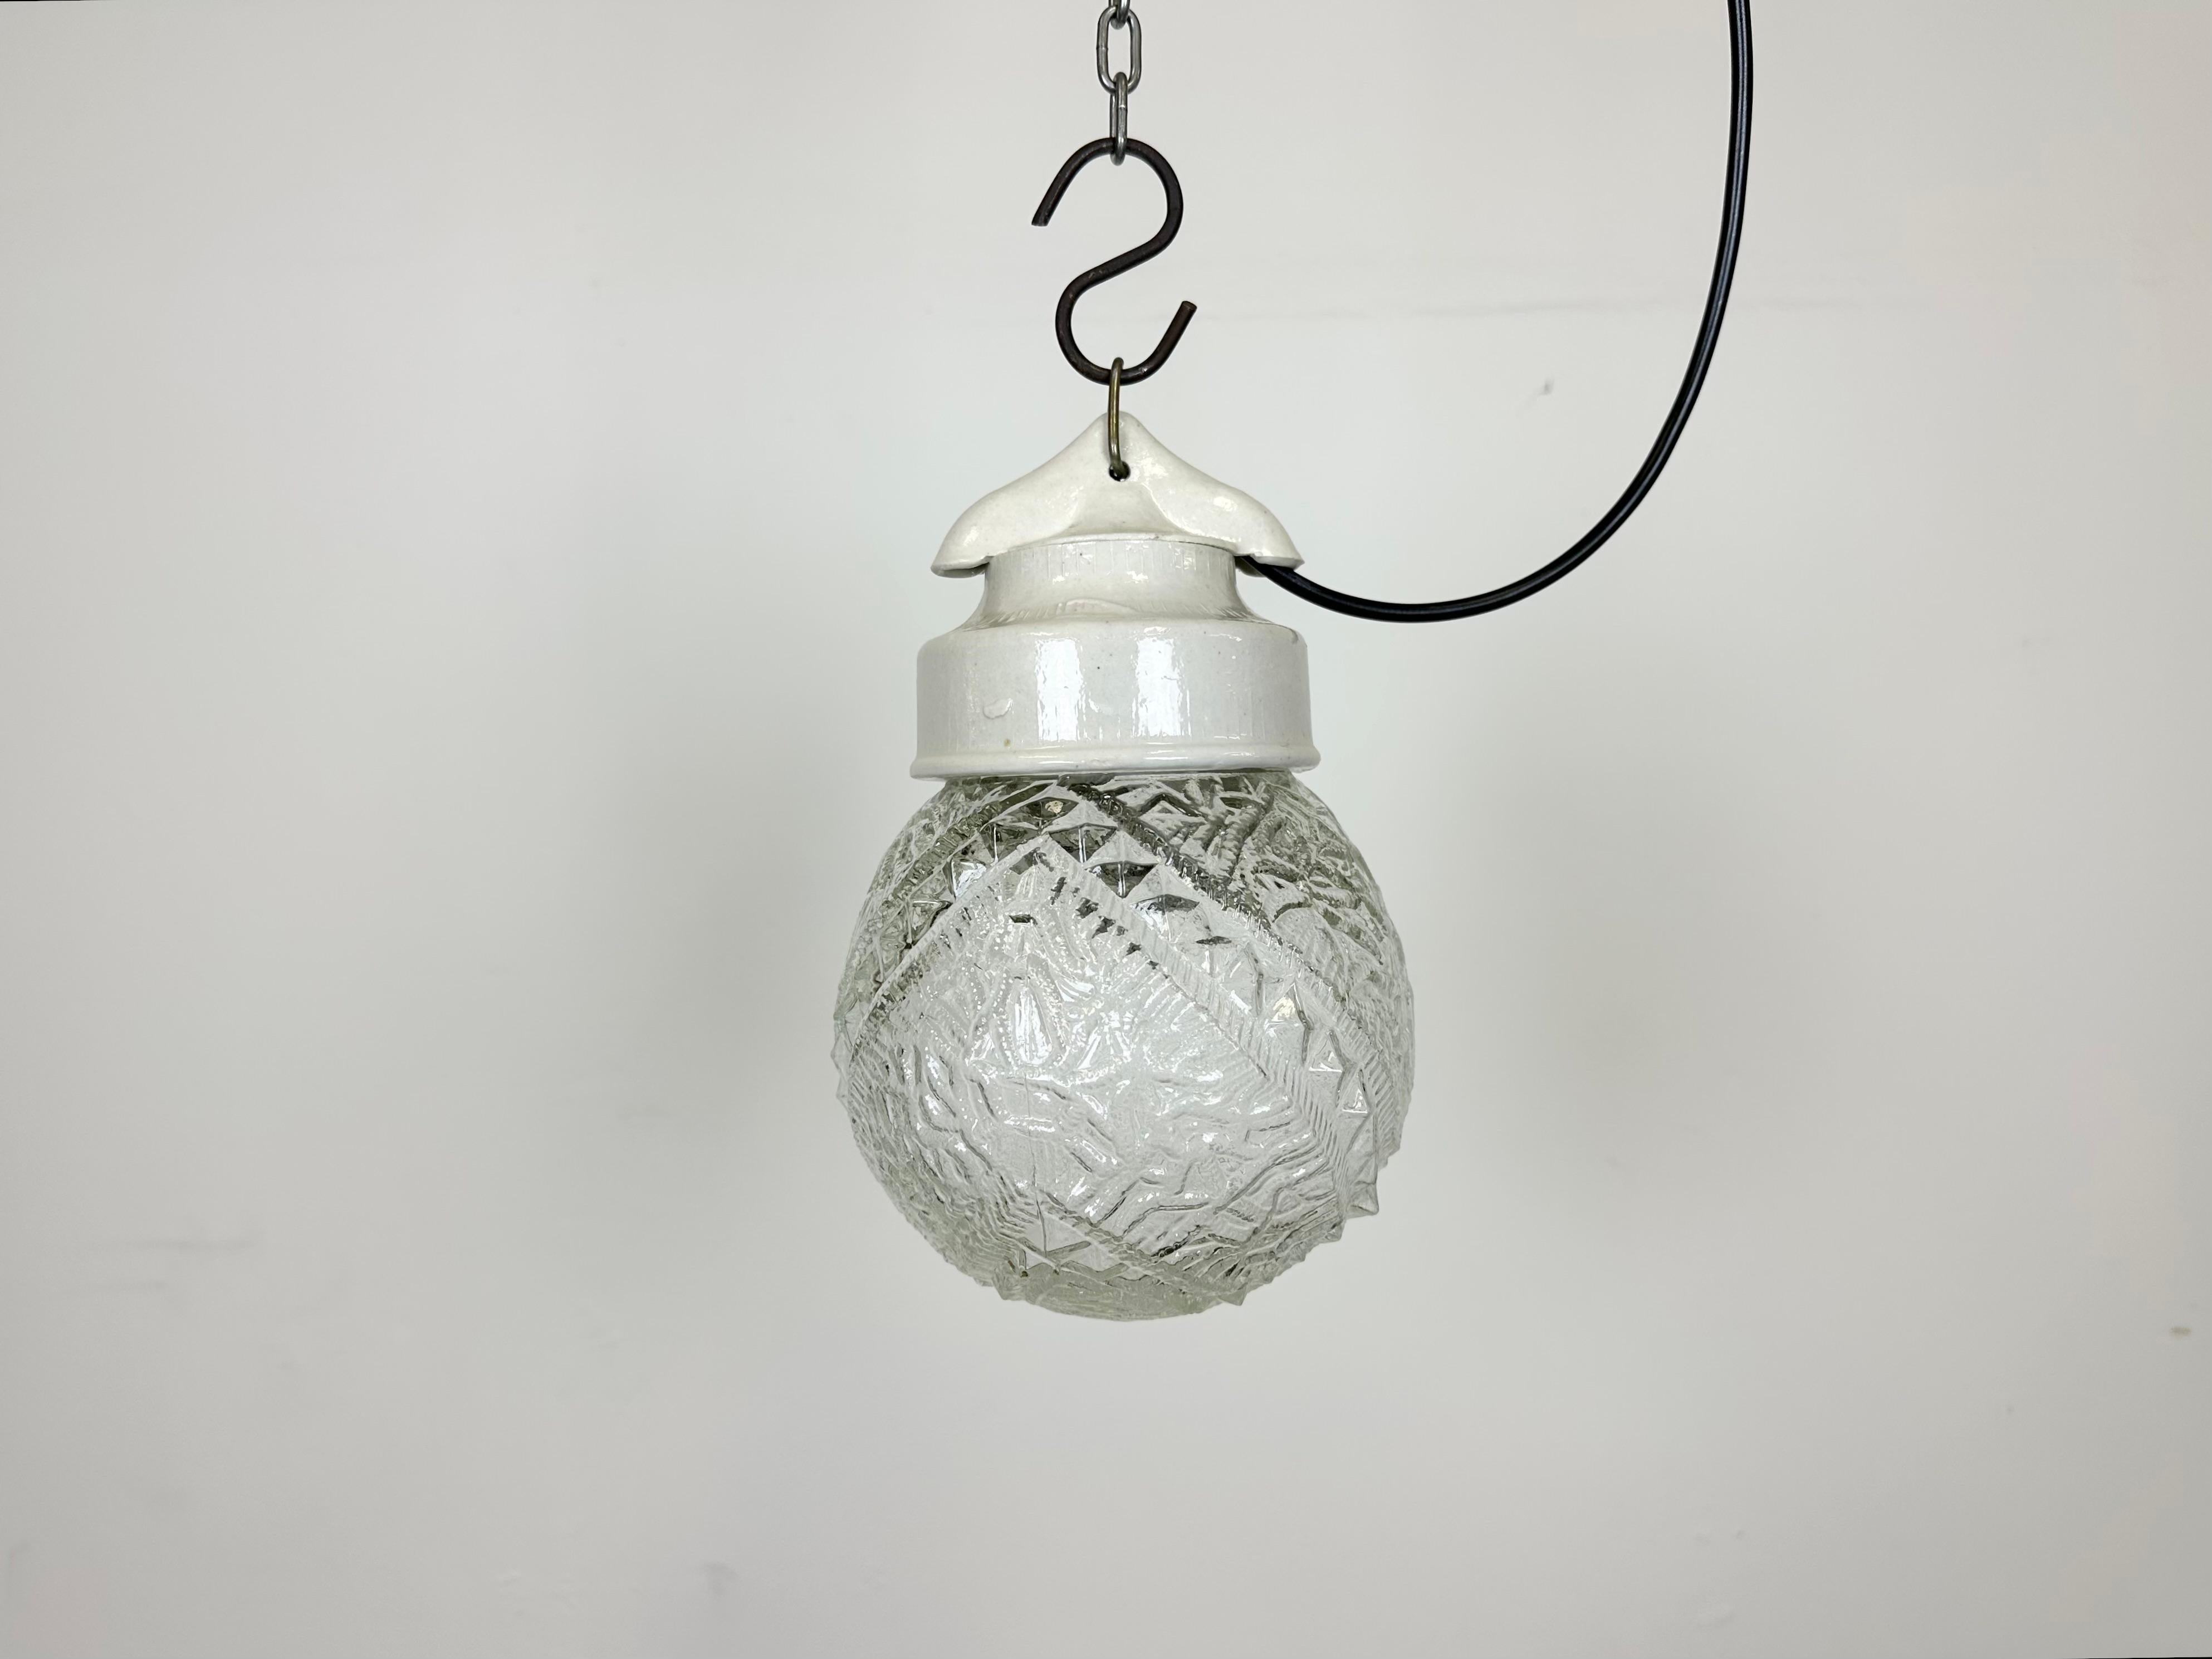 Vintage industrial light made in Poland during the 1970s. It features a white porcelain top and a glass cover. The socket requires E27/ E26 light bulbs. New wire. The weight of the light is 1 kg.
Dimensions:
Diameter of the porcelain : 10